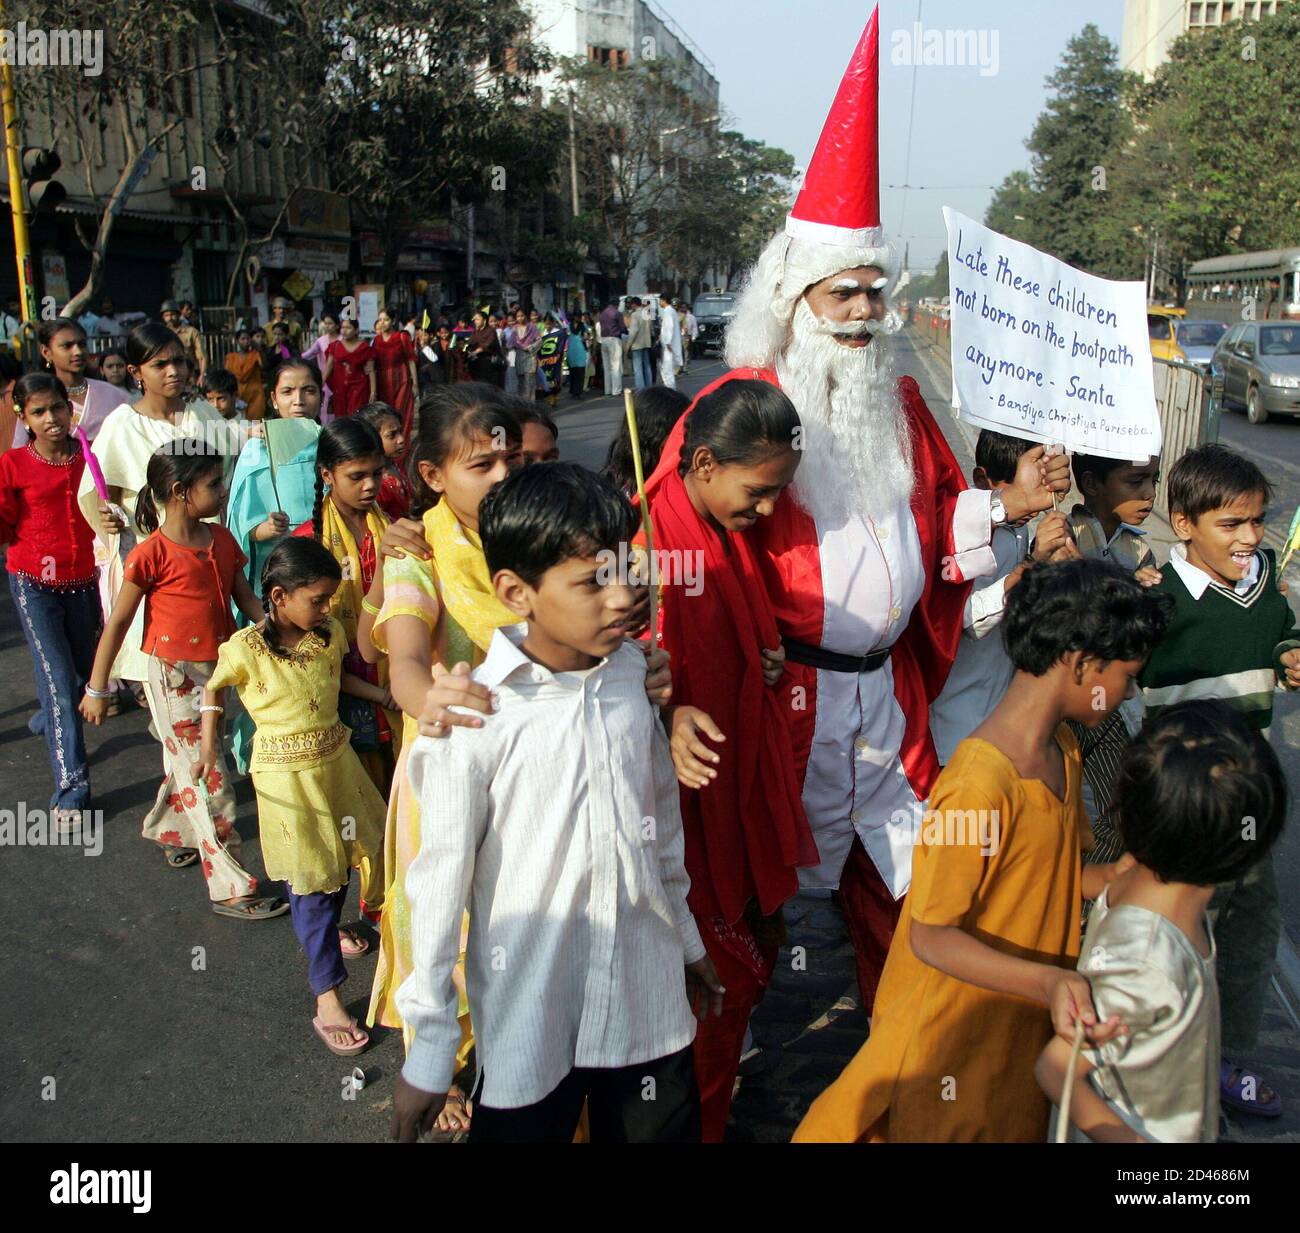 An Indian man dressed as Santa Claus leads a march of street children in Calcutta December 21, 2004. About 200 street children participated in the rally, which was organised by a Christian group pressing for better living conditions for these disadvantaged youngsters. REUTERS/Jayanta Shaw  JS/LA Stock Photo